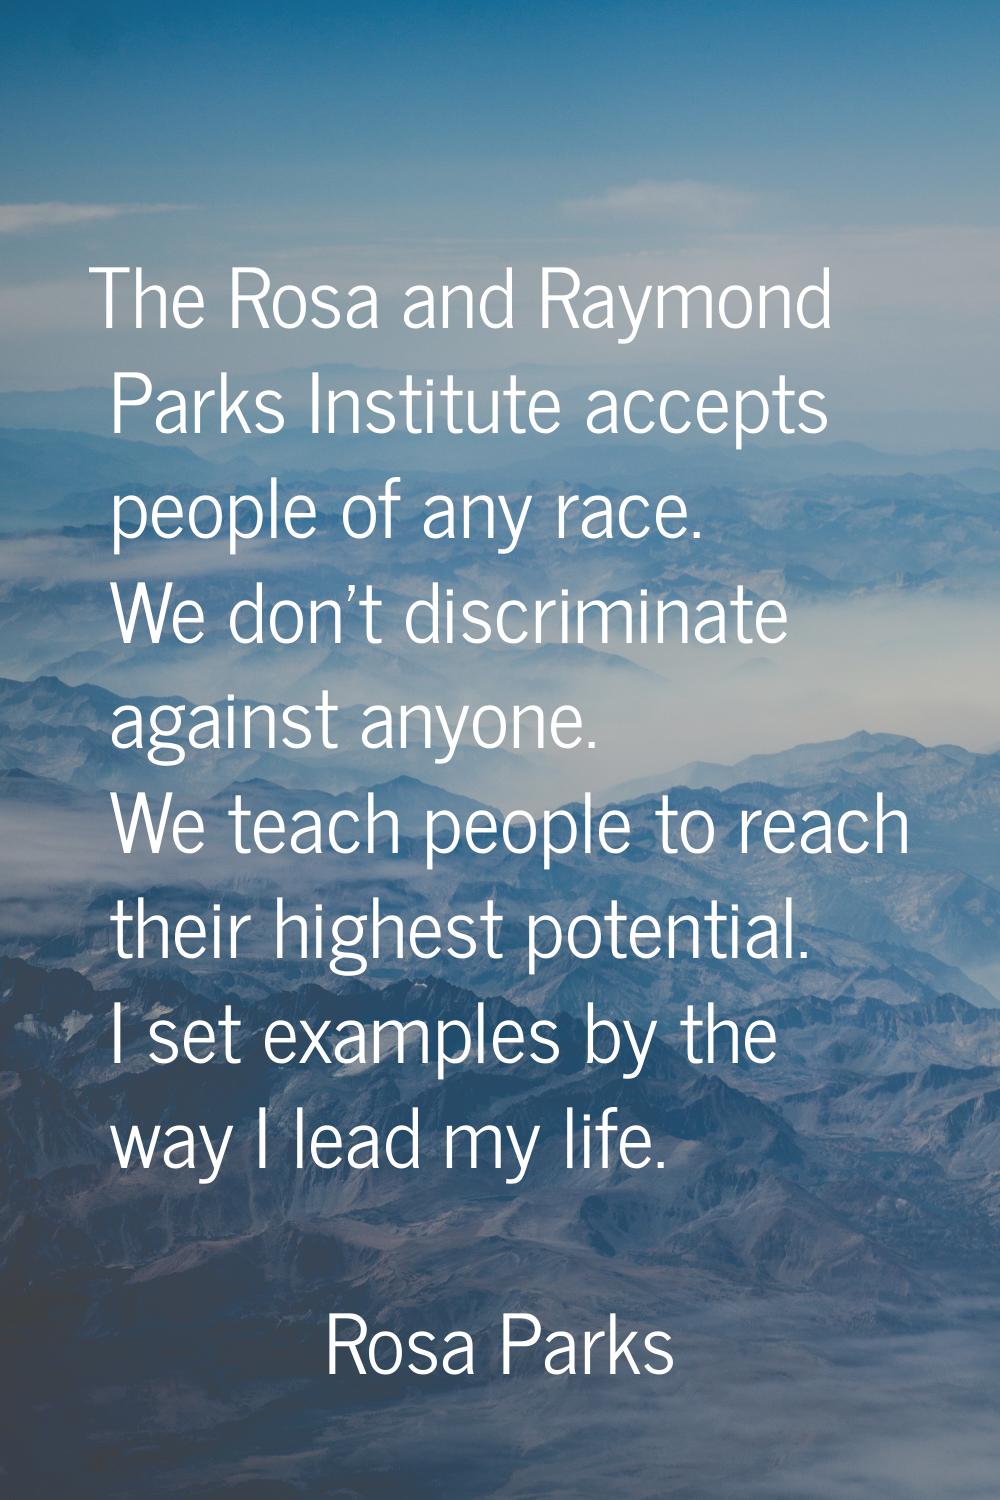 The Rosa and Raymond Parks Institute accepts people of any race. We don't discriminate against anyo